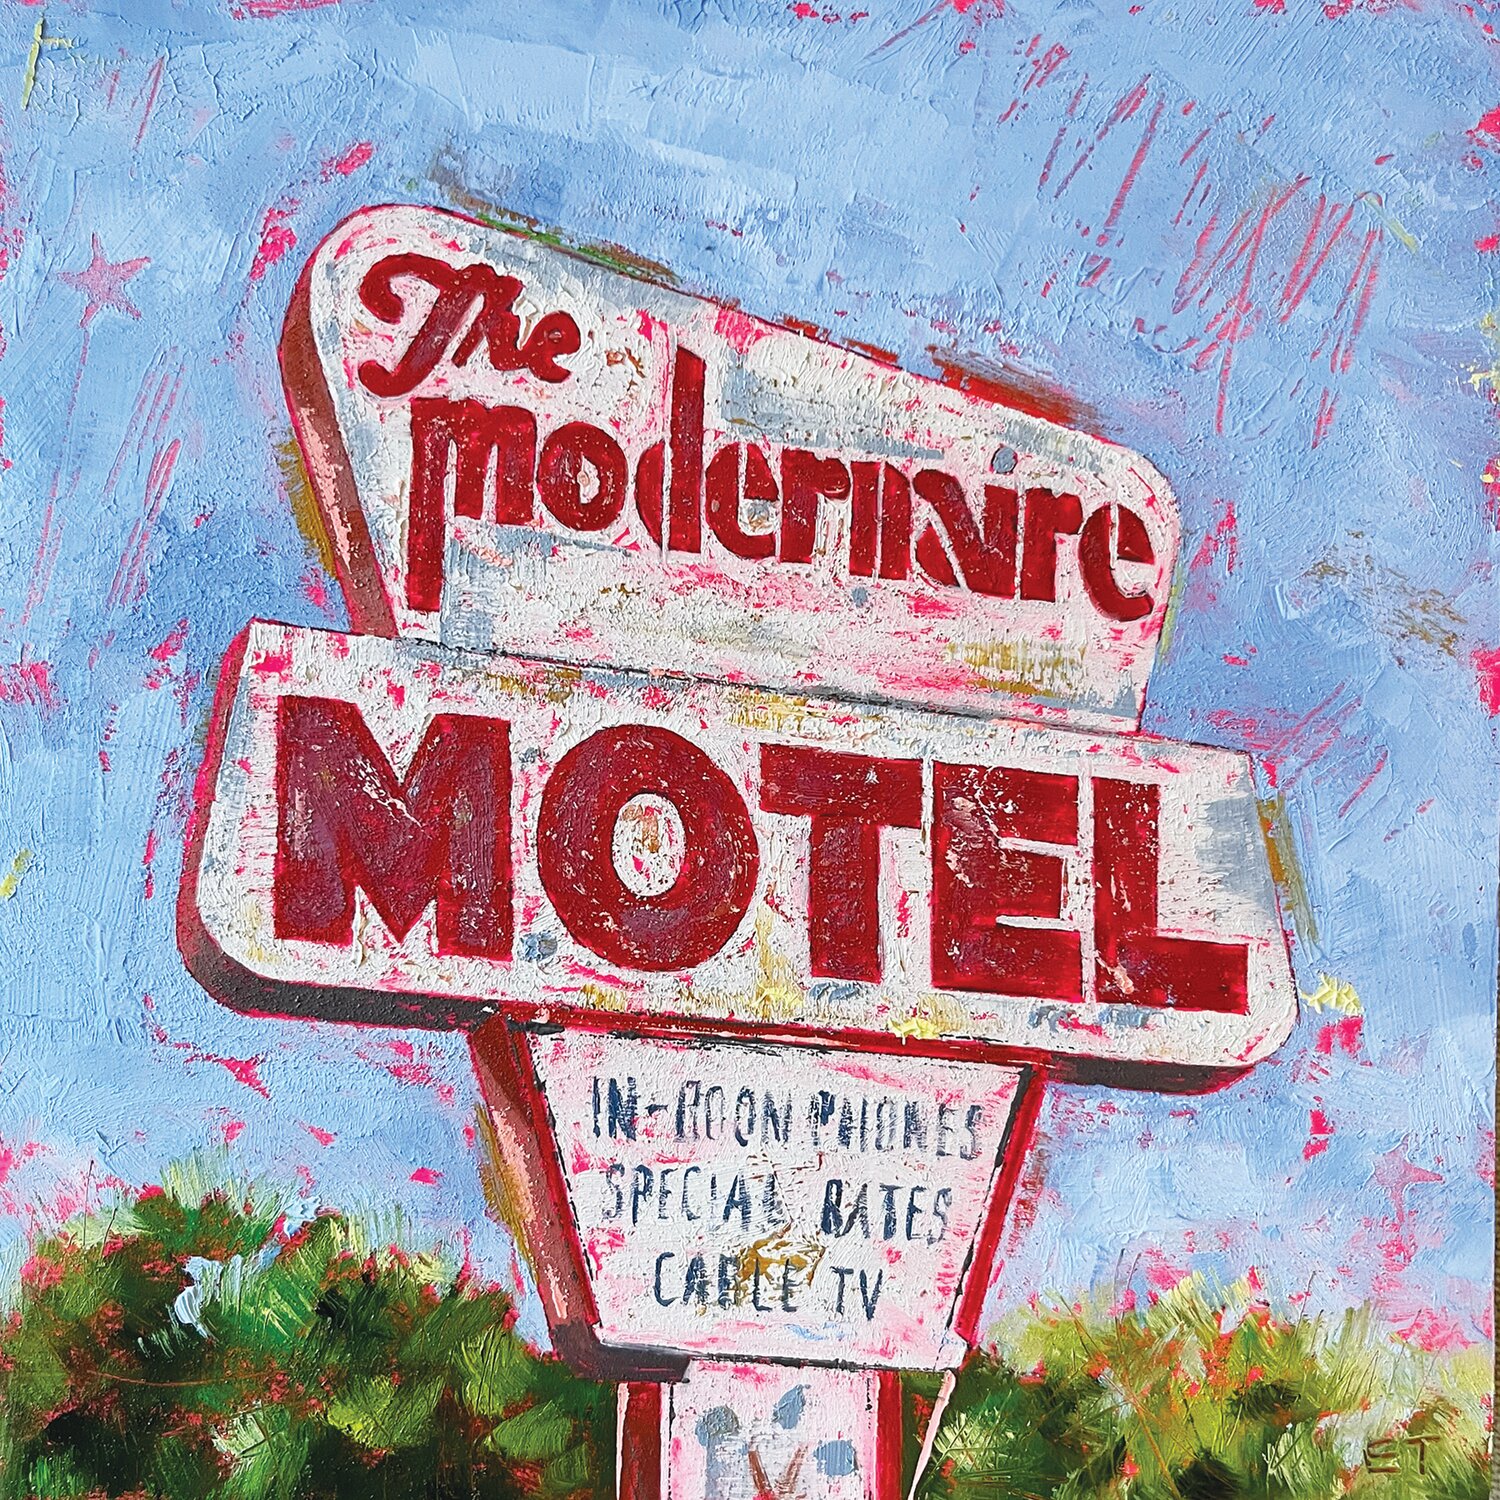 “The Modernaire Motel” is an oil painting by Emily Thompson.